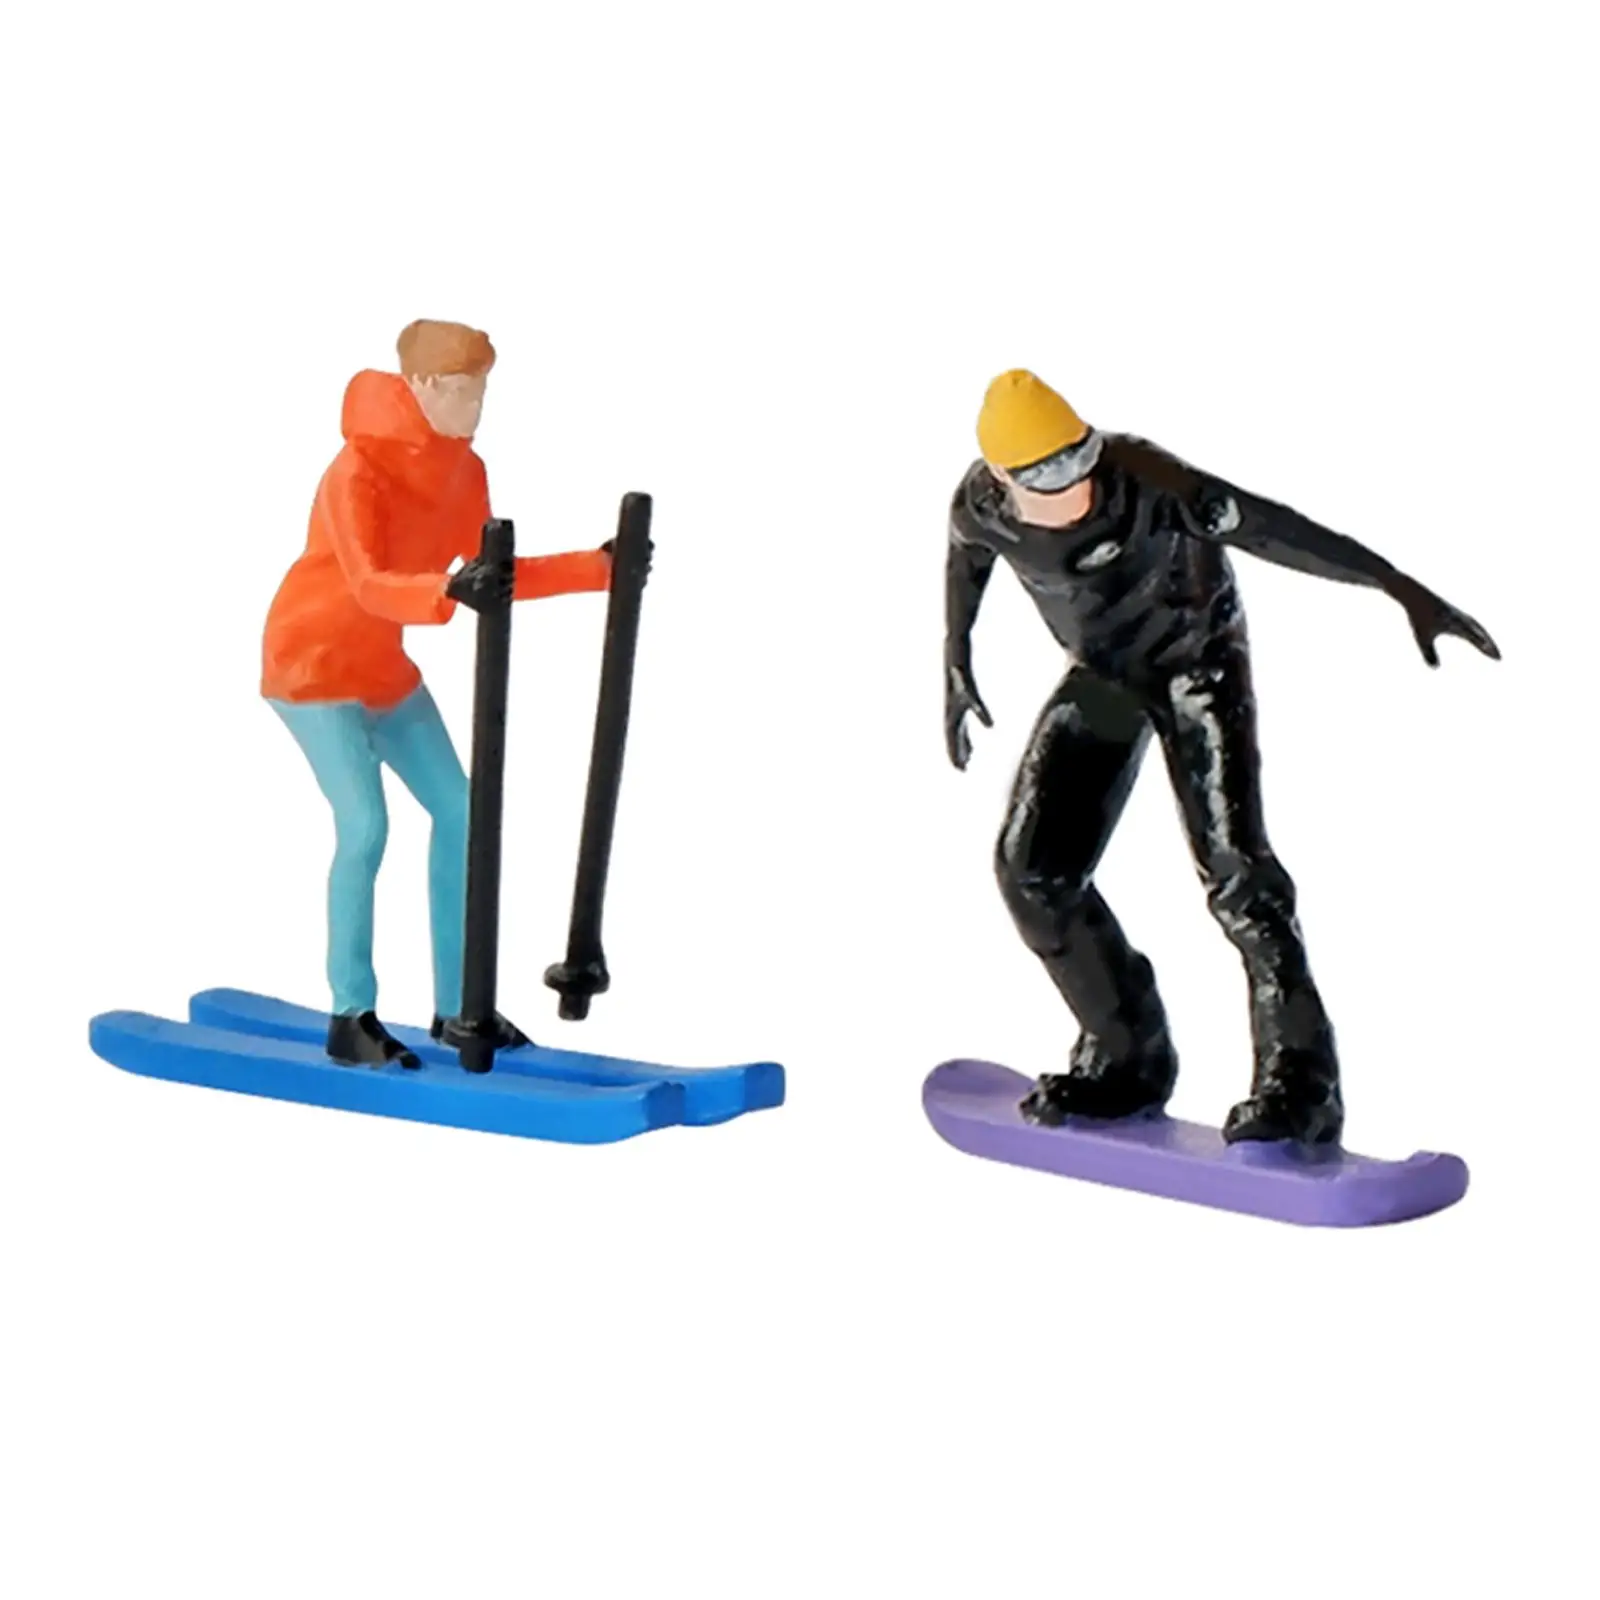 1:64 Scale Skiing Model People Figures Skier Figures for Sand Table Dollhouse Layout Decor